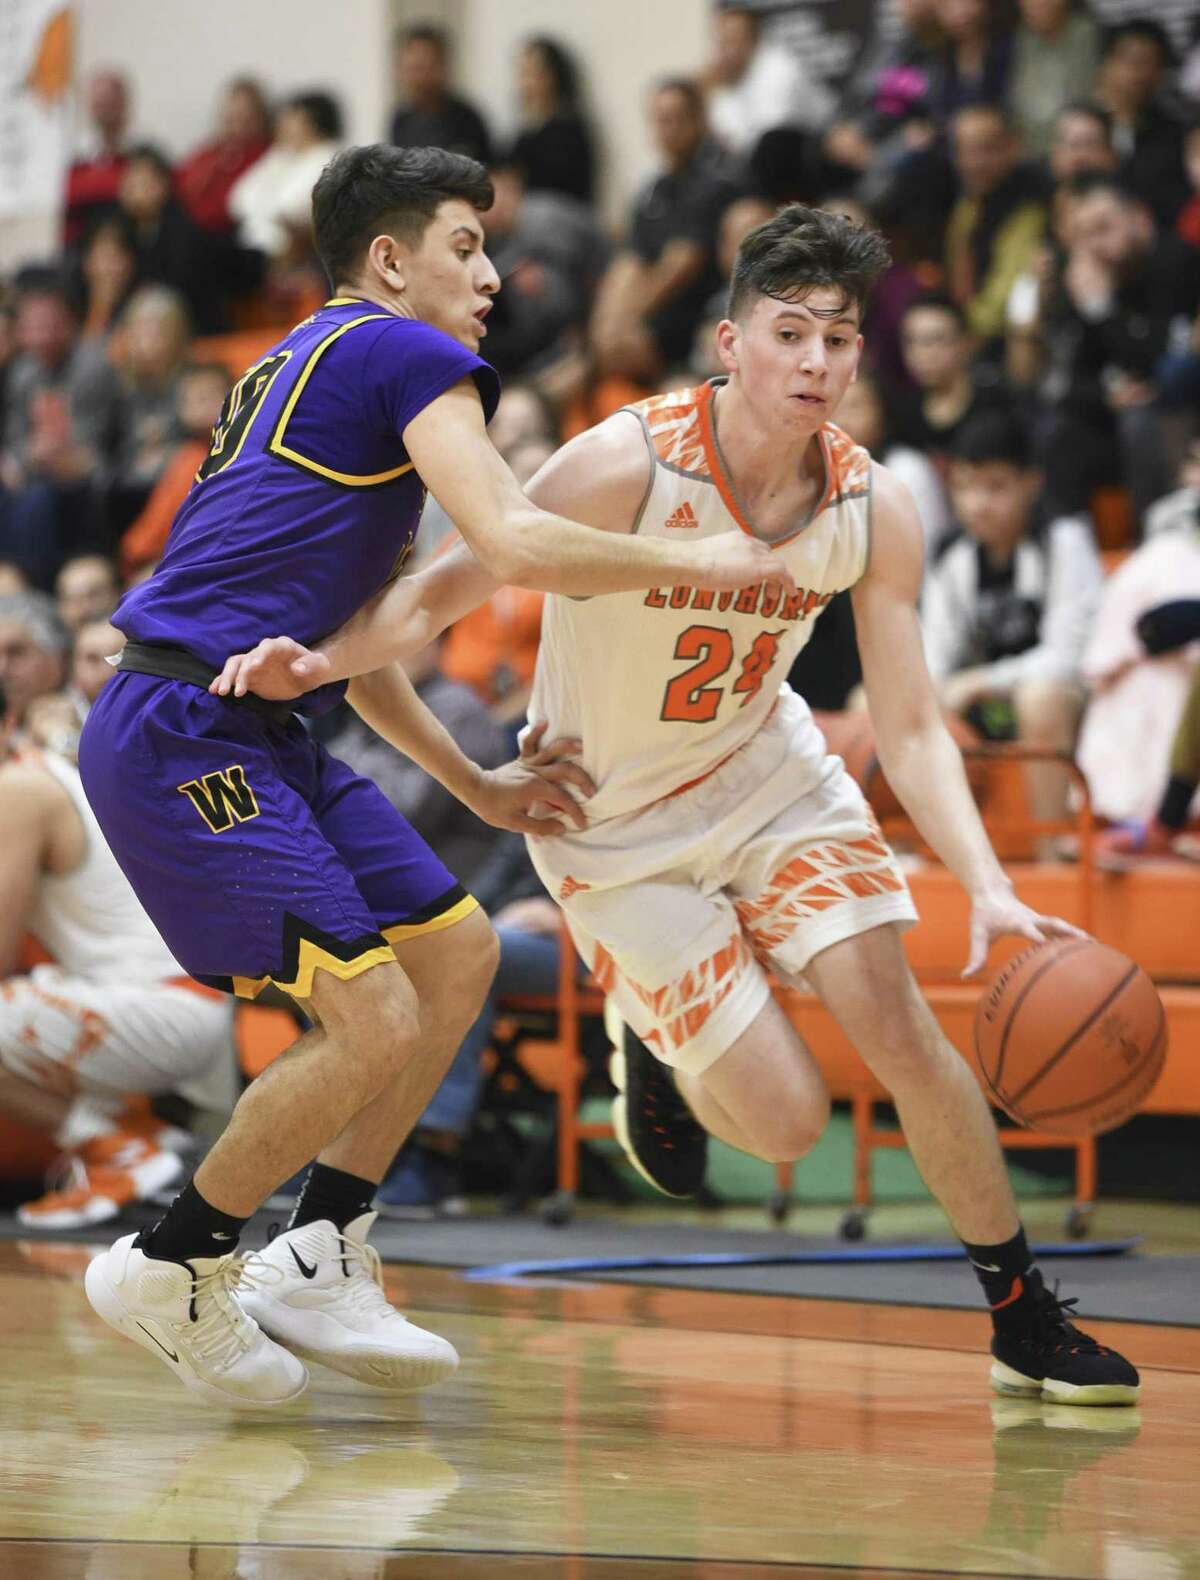 Carlos Guzman had four rebounds, three points and a steal Friday as United opened district play with a 65-47 victory at home over LBJ.